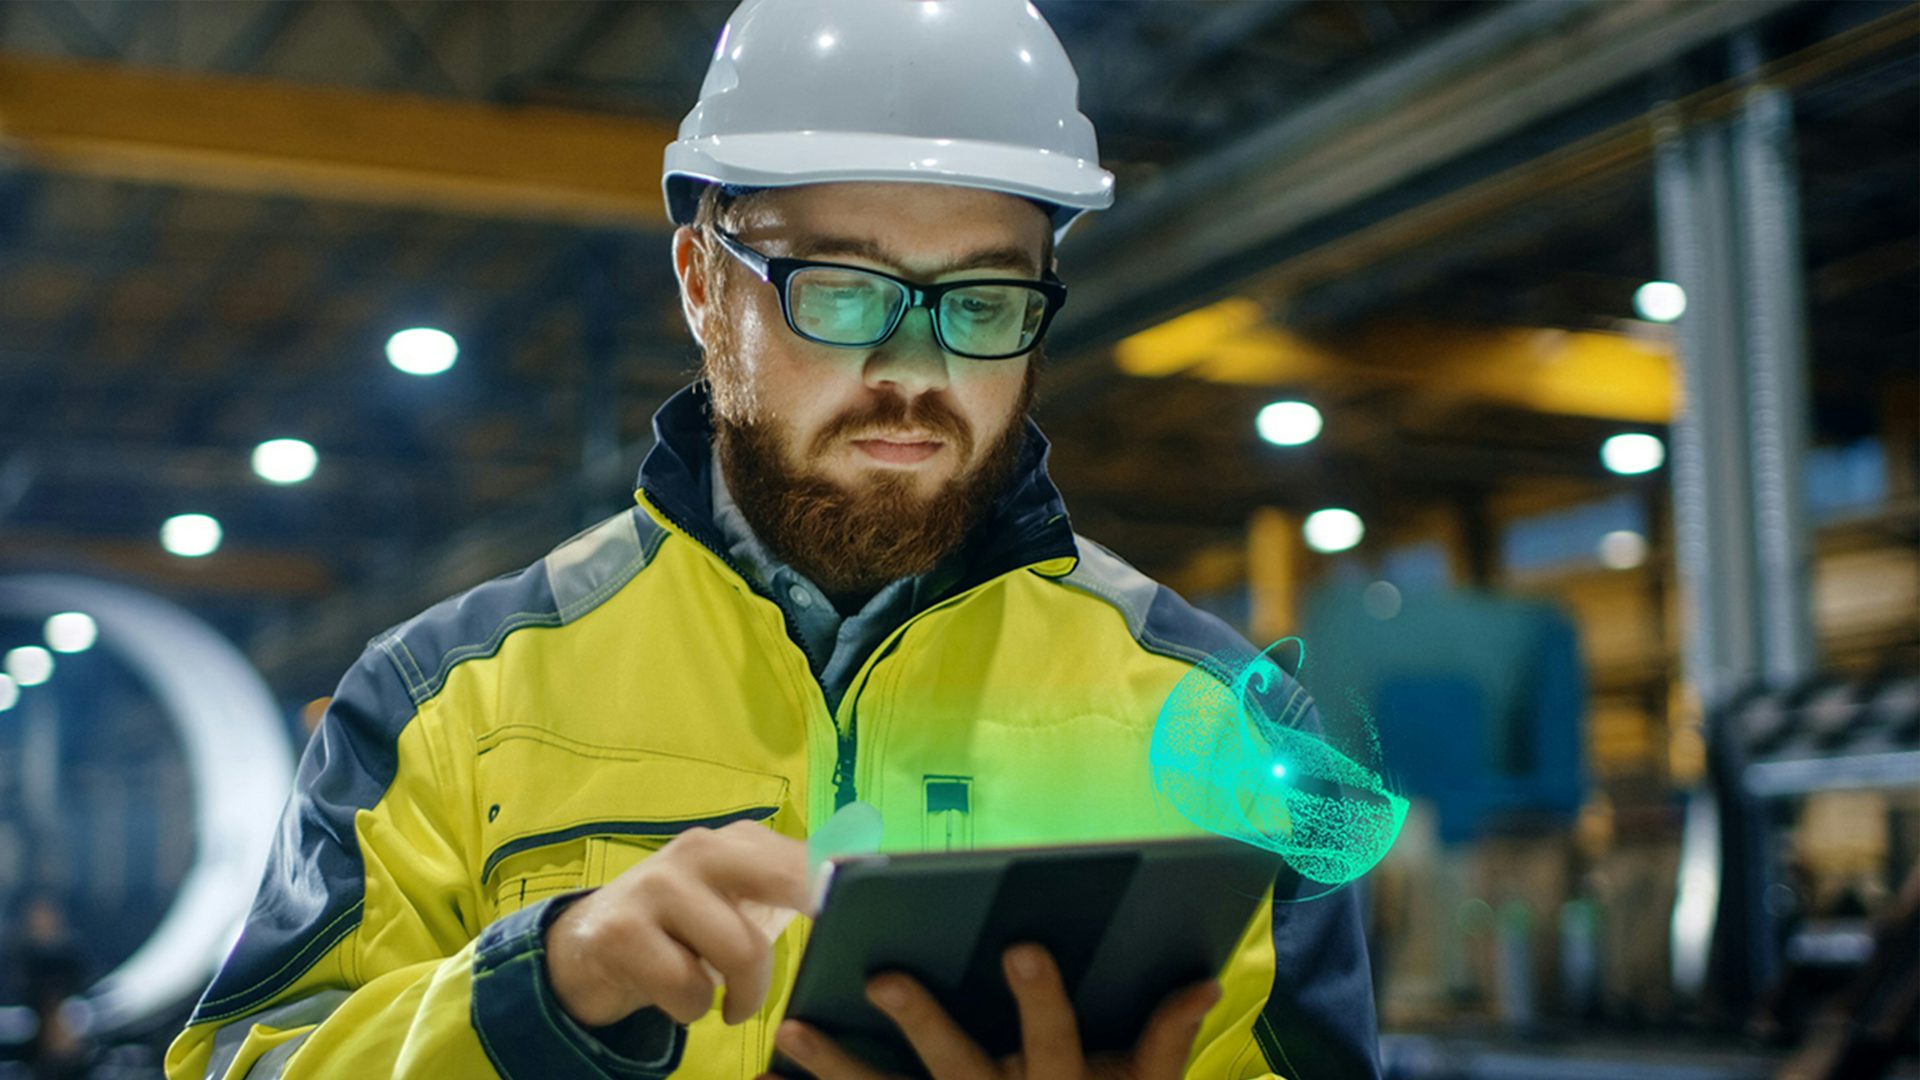 A man in a hardhat looks at a tablet that is emanating green graphics